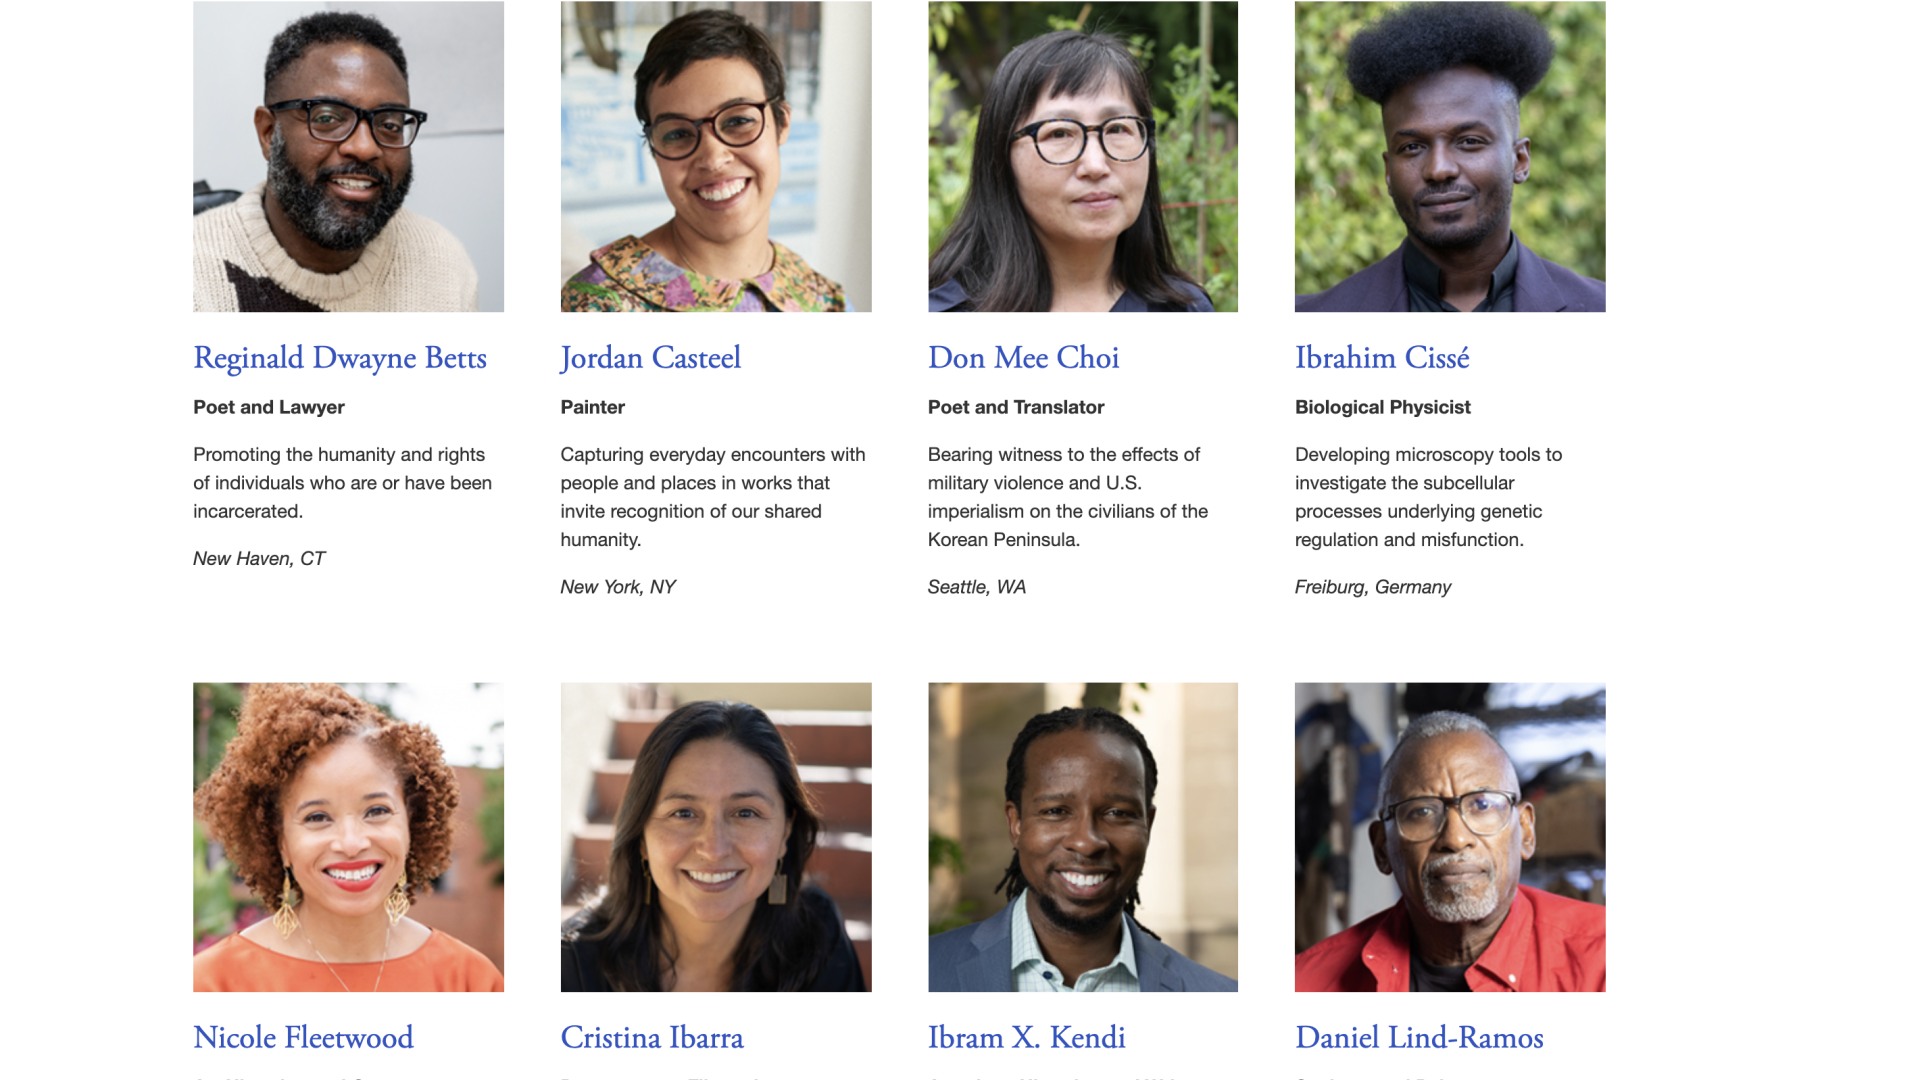 Head Of The Class: Nearly Half Of The 2021 MacArthur "Genius" Grant Winners Are Black